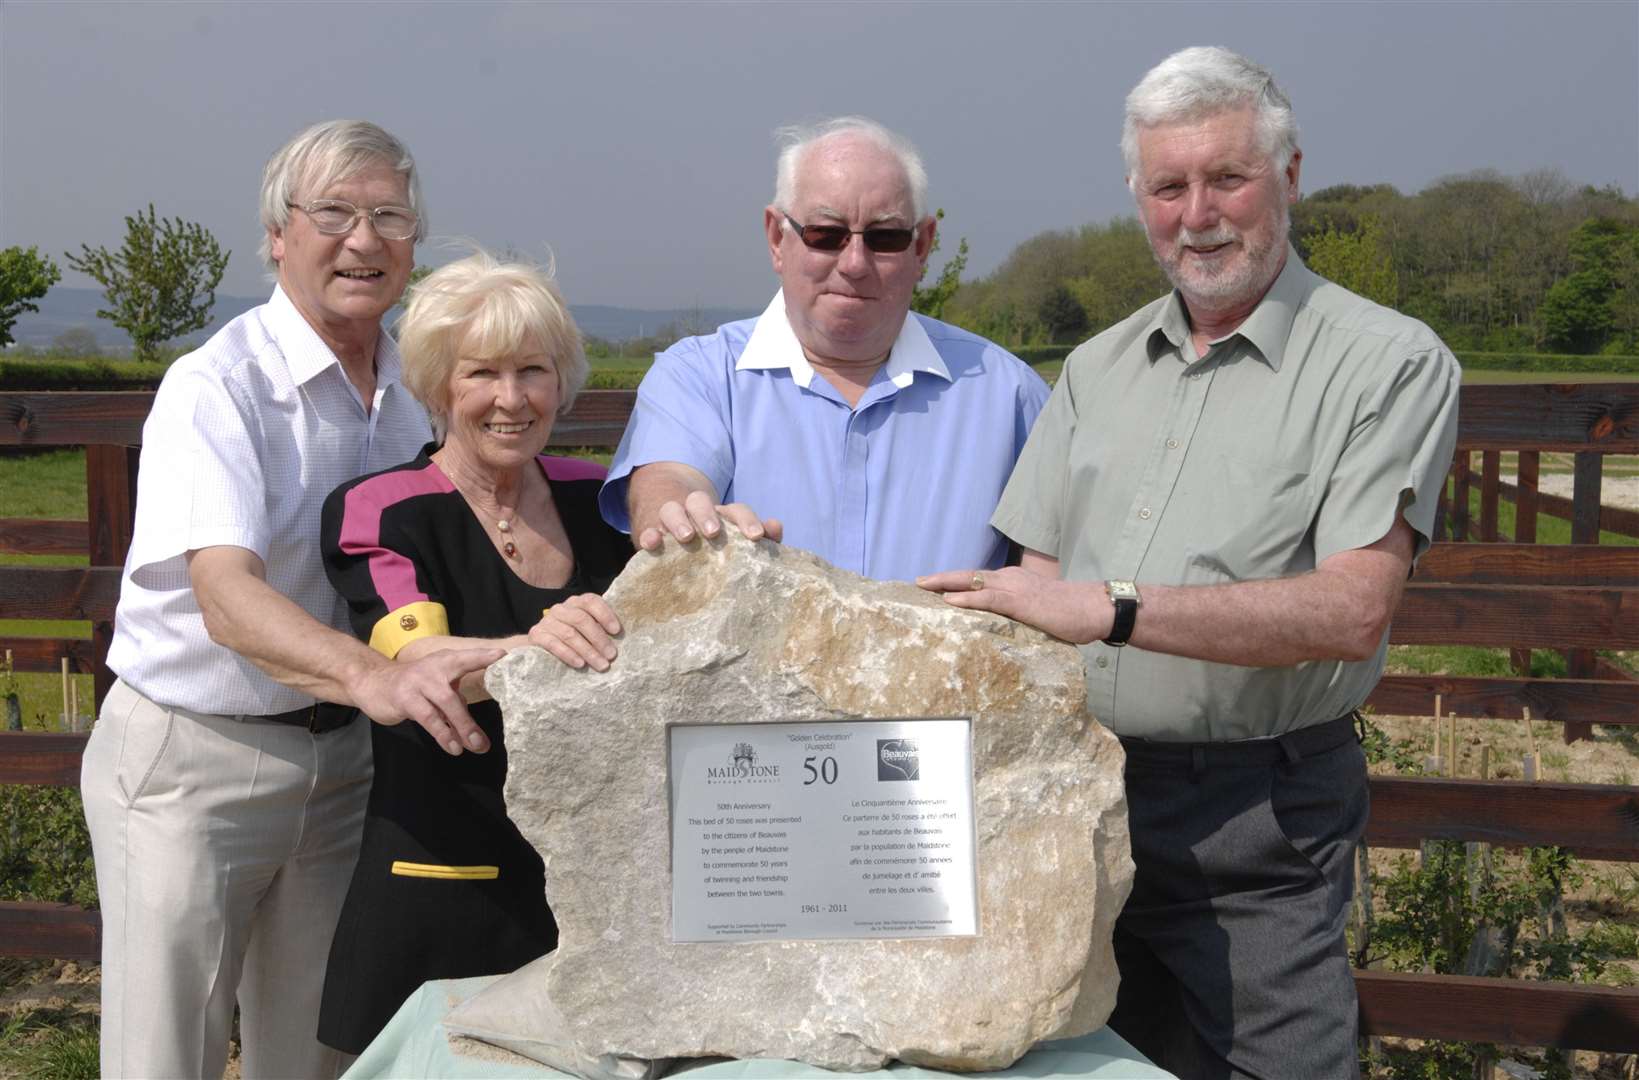 Members of Maidstone's twinning association with a plaque marking 50 years of the relationship with Beauvais. Picture: Matthew Walker